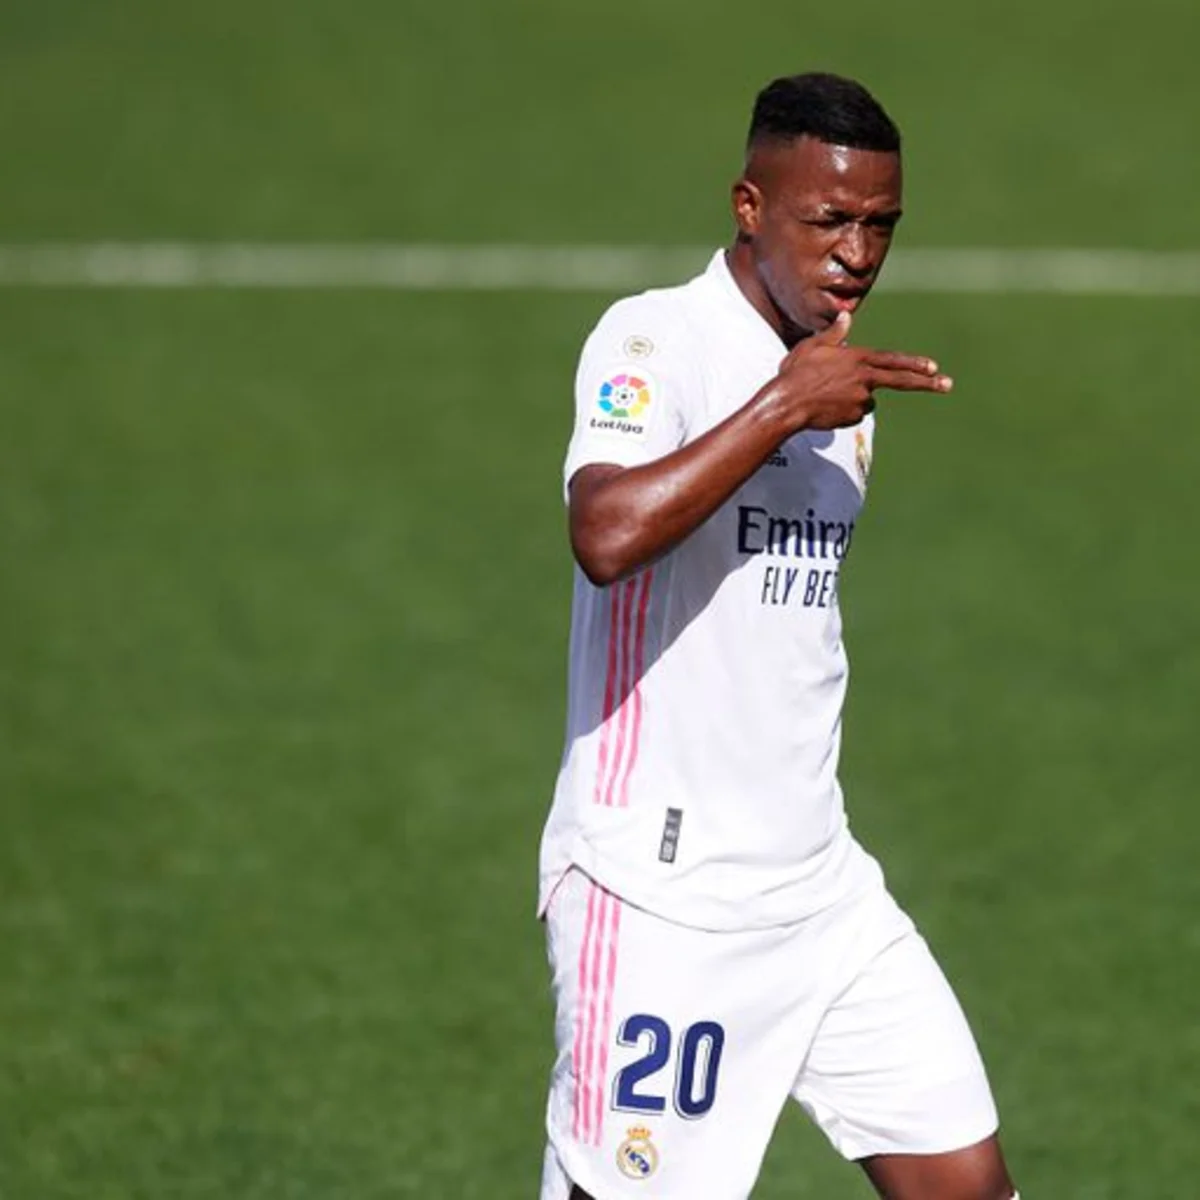 Vinicius Junior: After Cristiano Ronaldo and Karim Benzema, Vinicius Junior  the new penalty star for Real Madrid: Report - The Economic Times